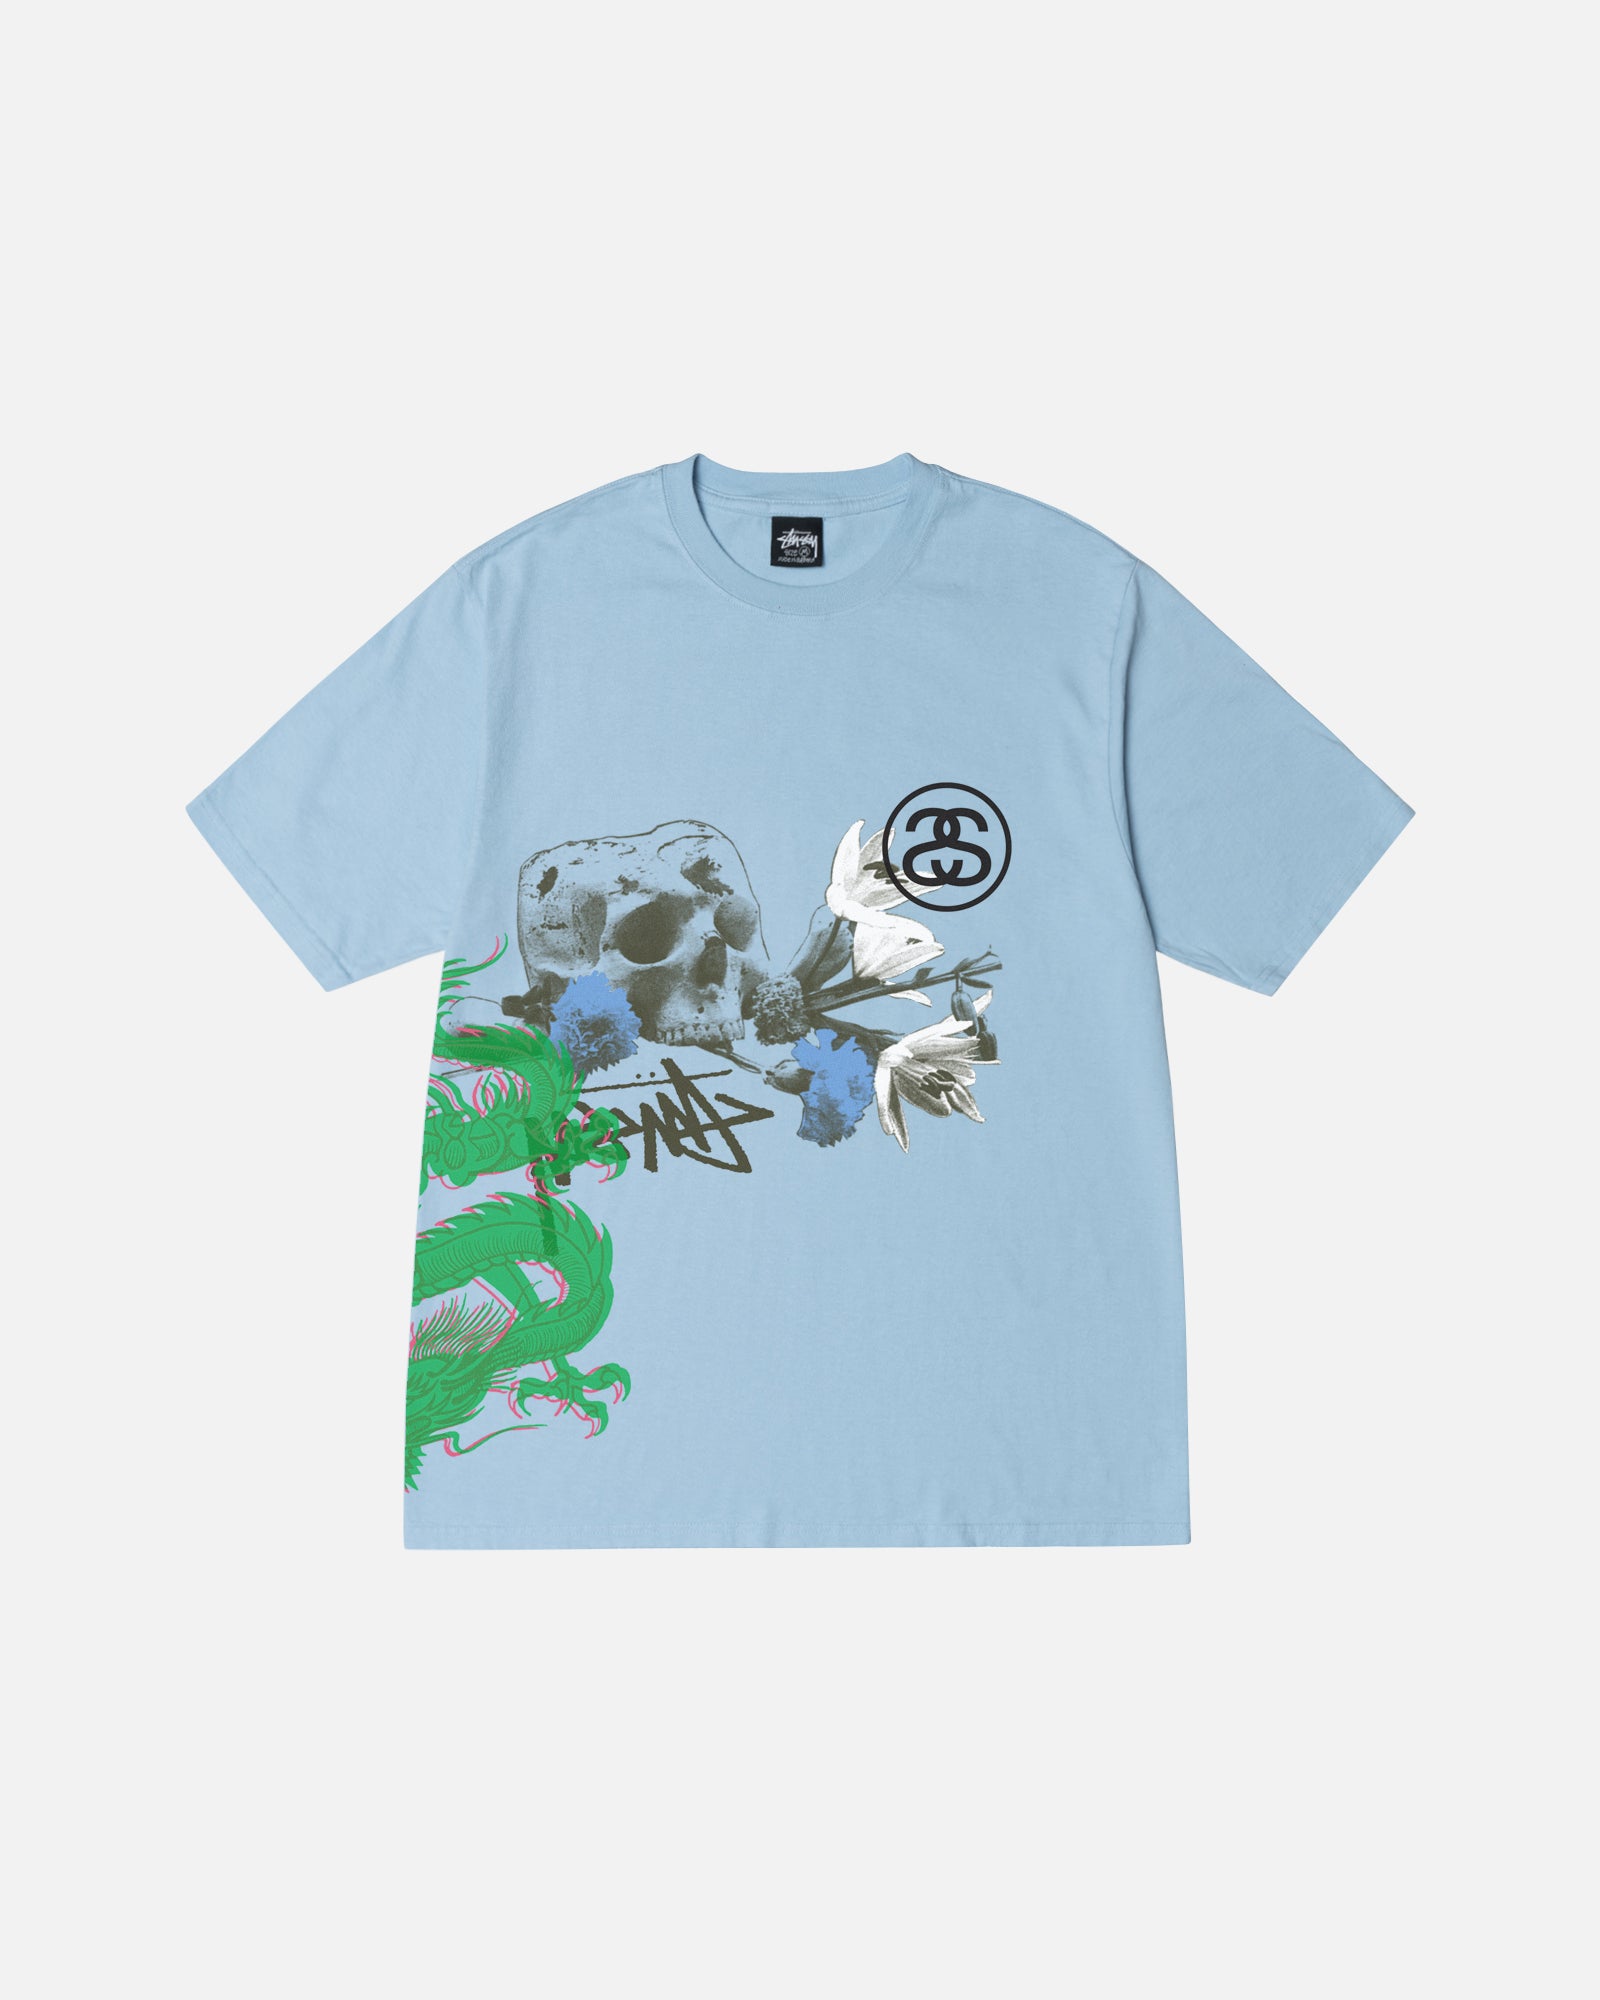 Men's Tees: Graphic Tees & Basic Logo T-Shirts by Stüssy